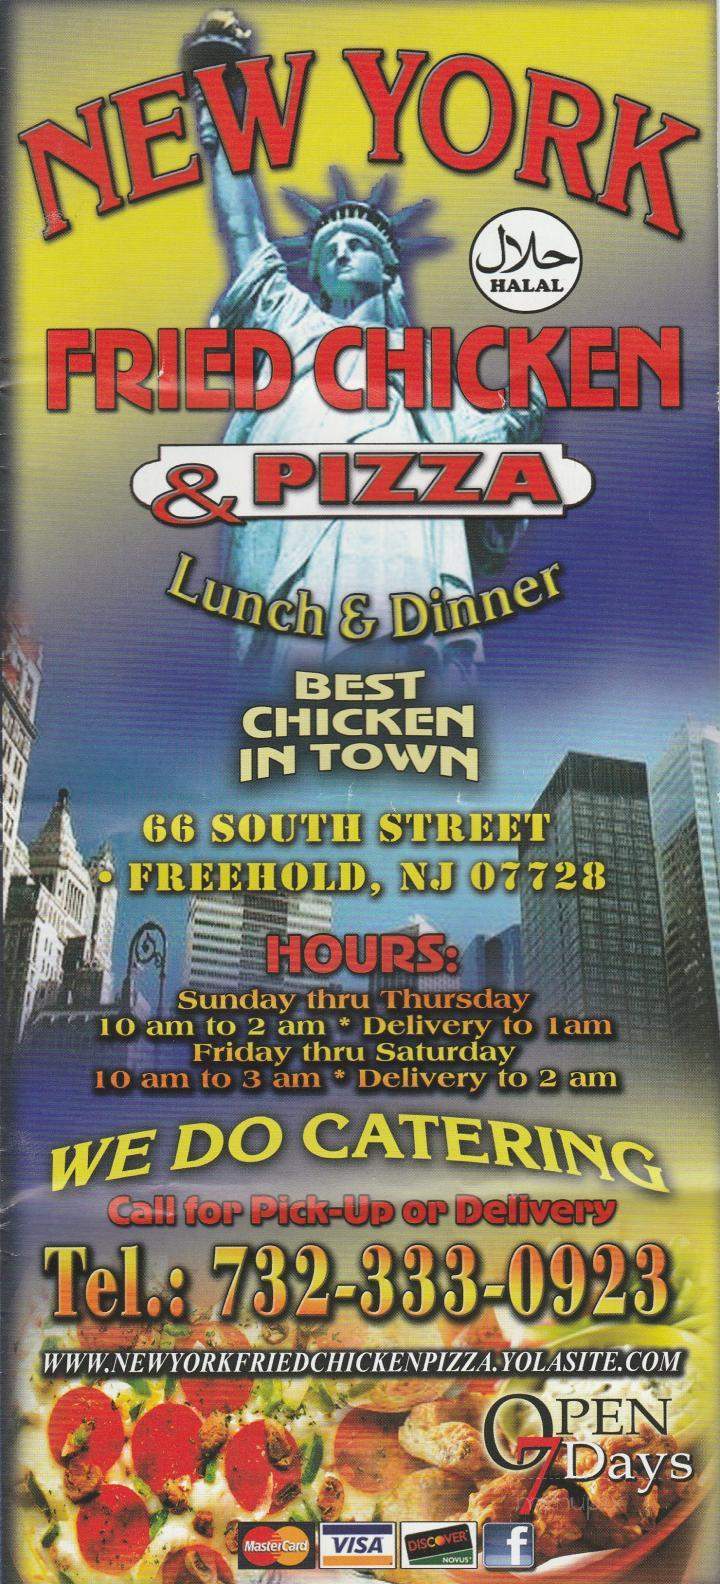 New York Fried Chicken & Pizza - Freehold, NJ